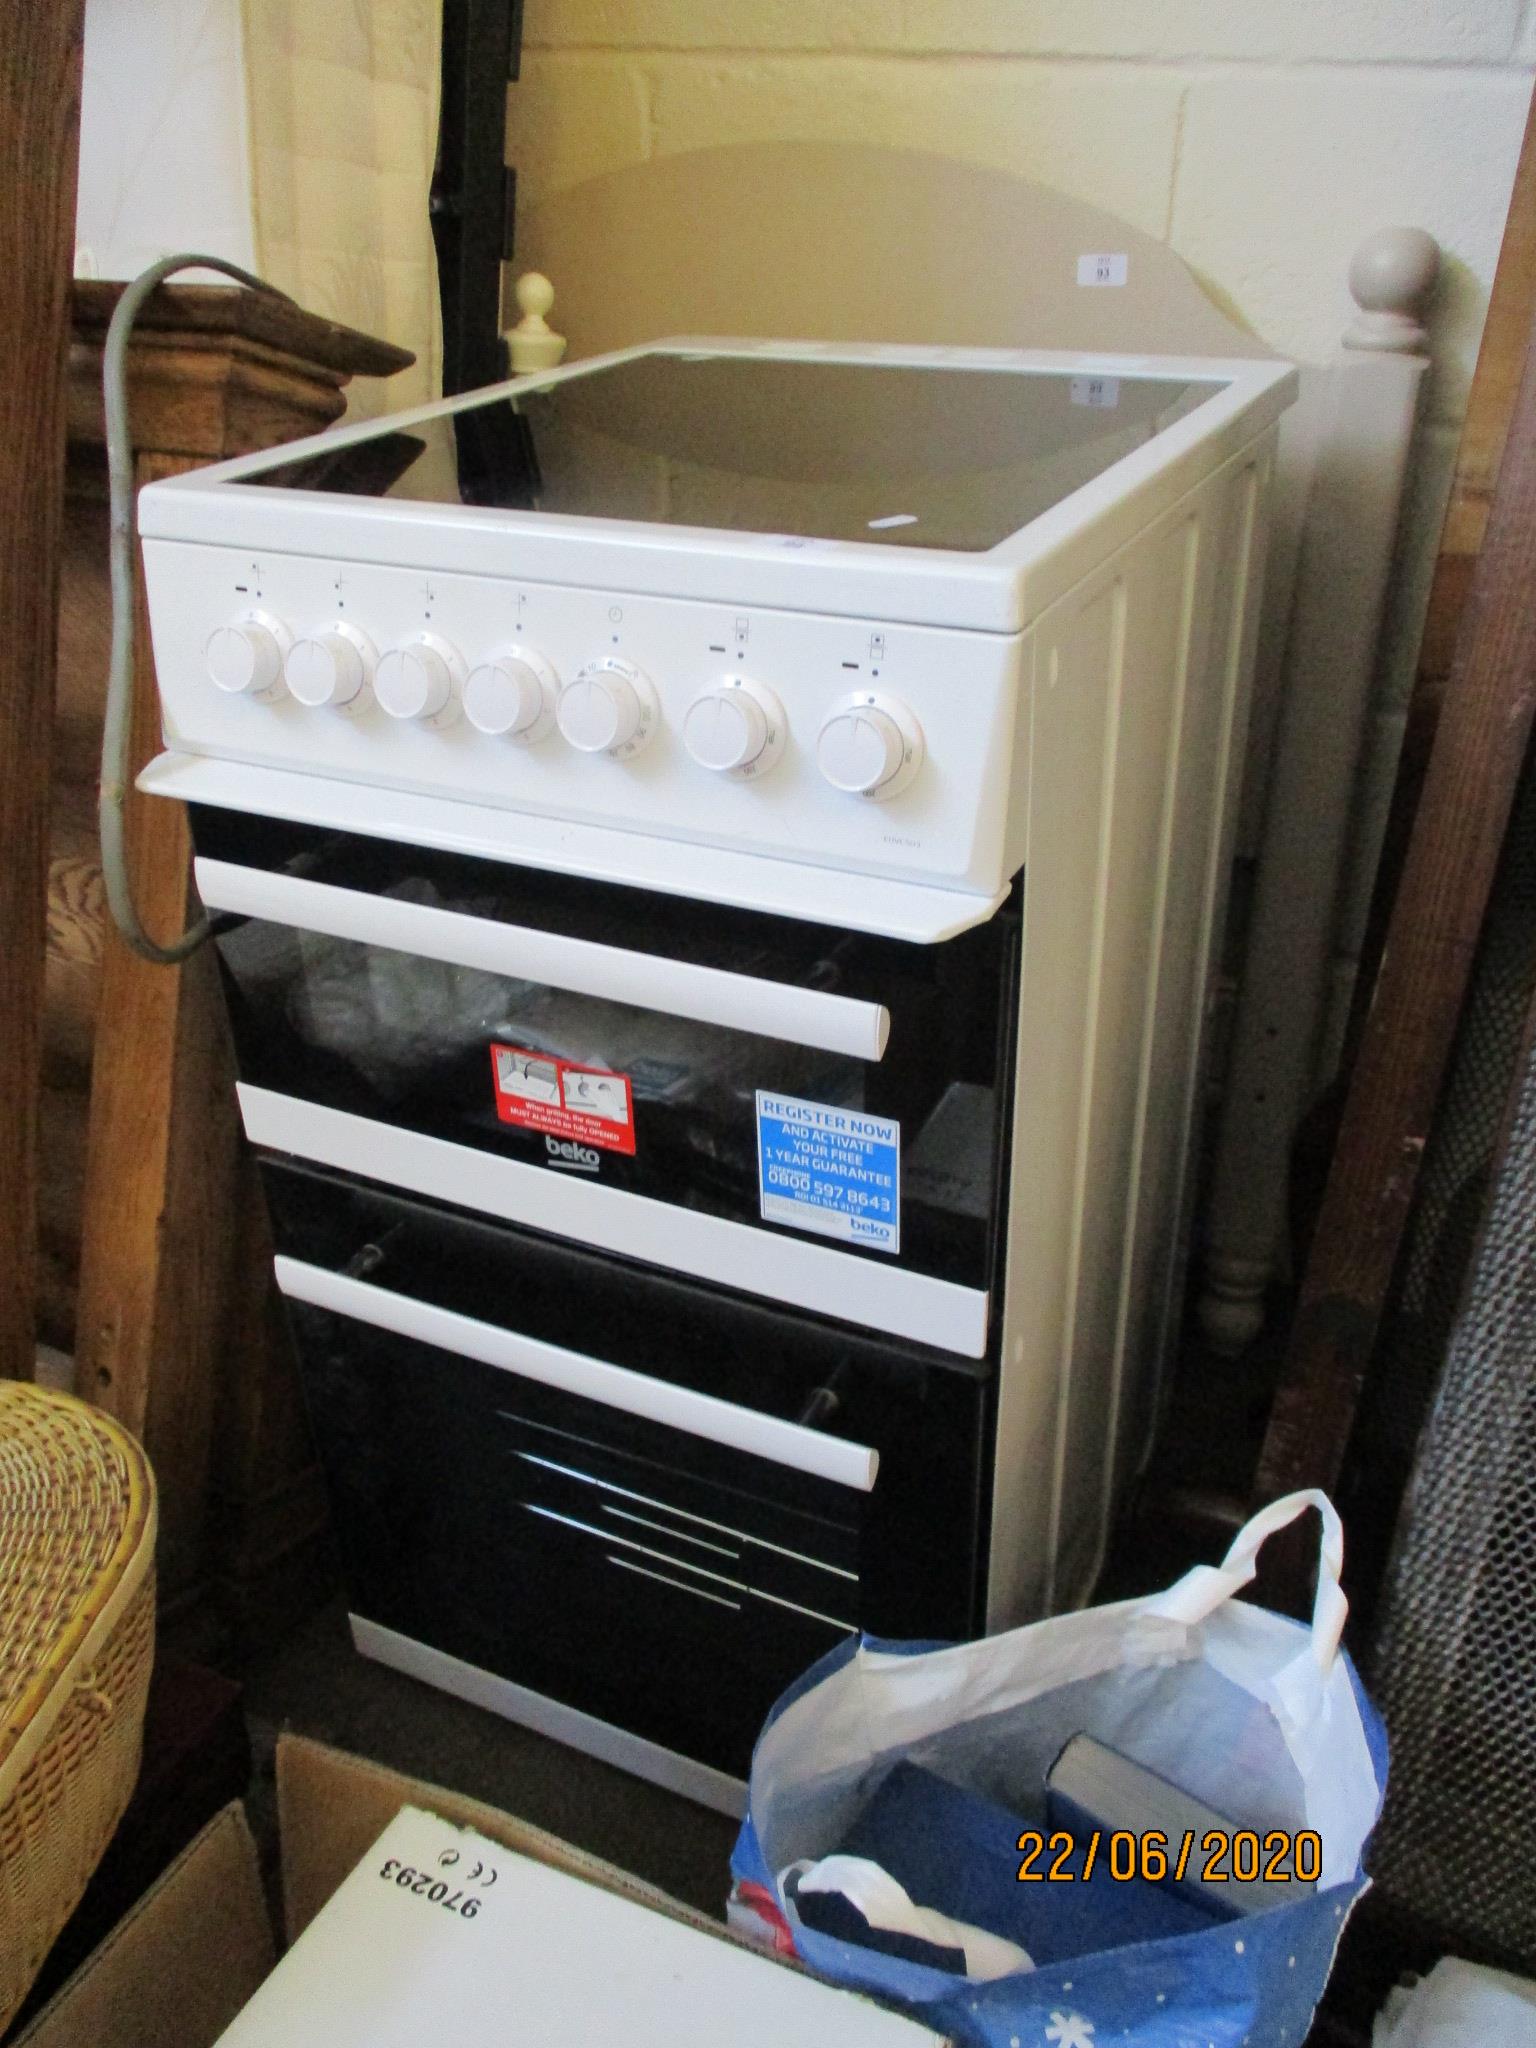 ELECTRIC COOKER APPARENTLY UNUSED